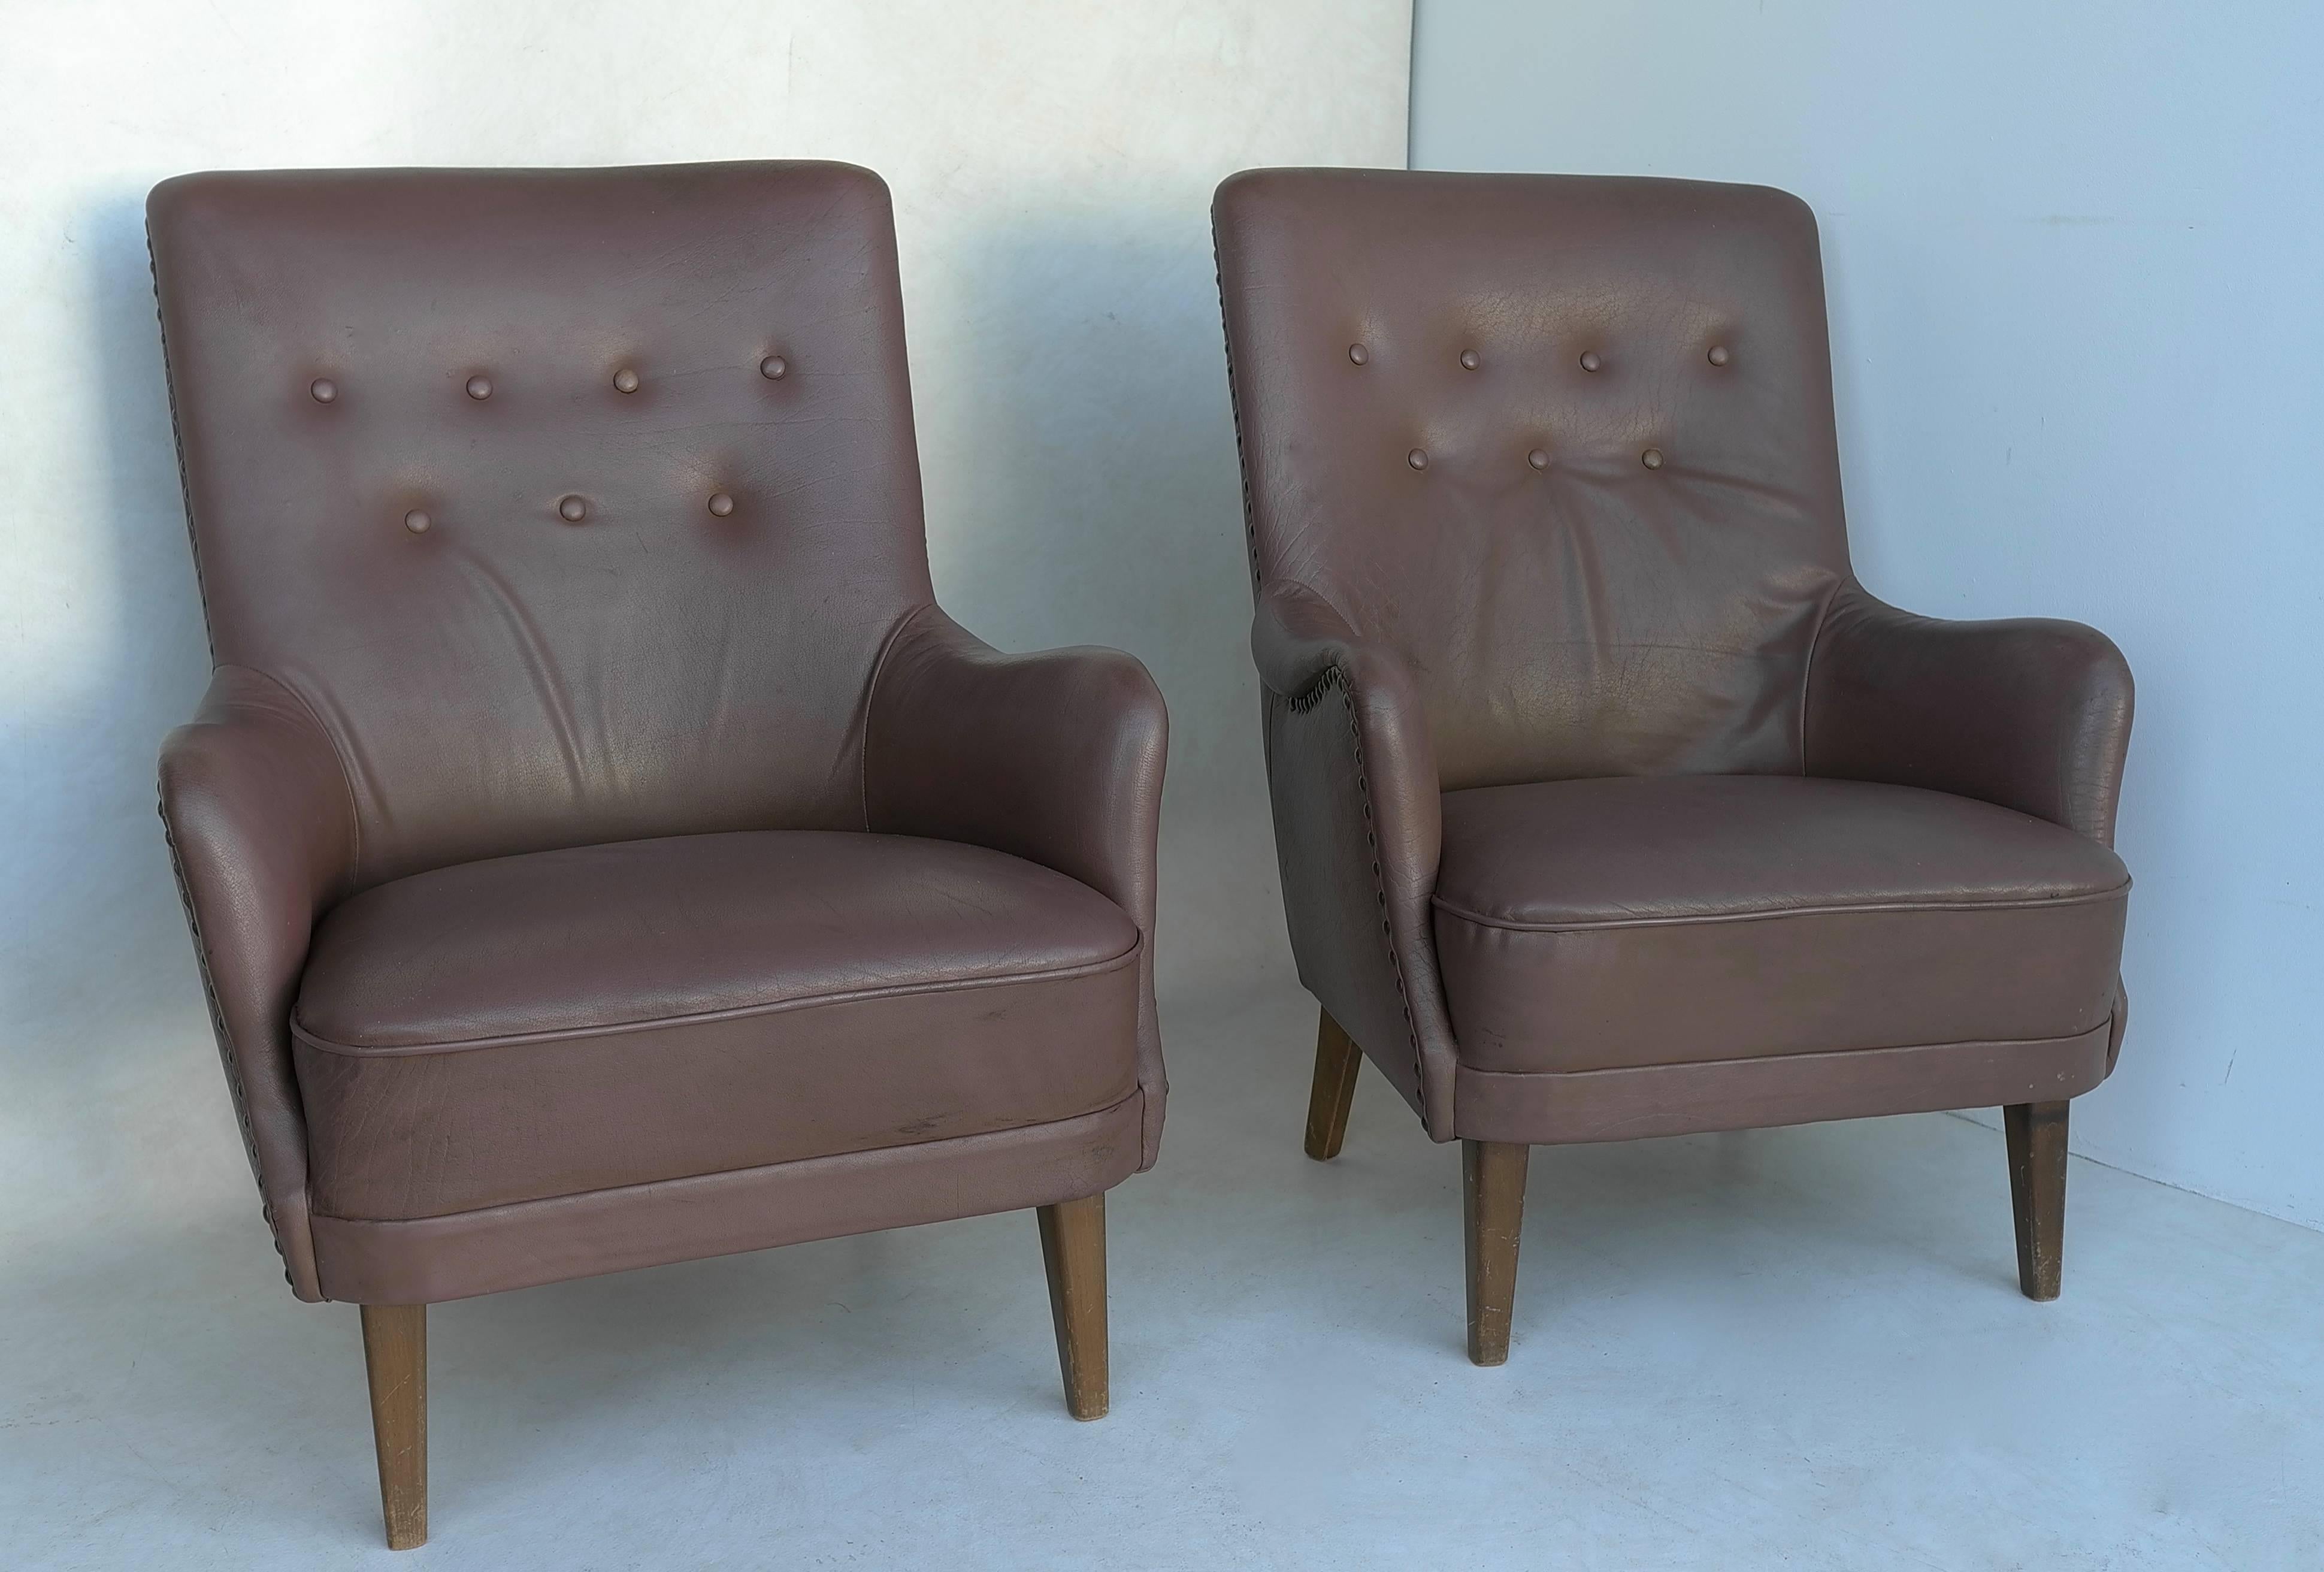 Pair of Danish high back armchairs in brown Leather with nailed trim.

Measures: Height 90cm, depth 60cm, length 68cm, seating height 40cm.